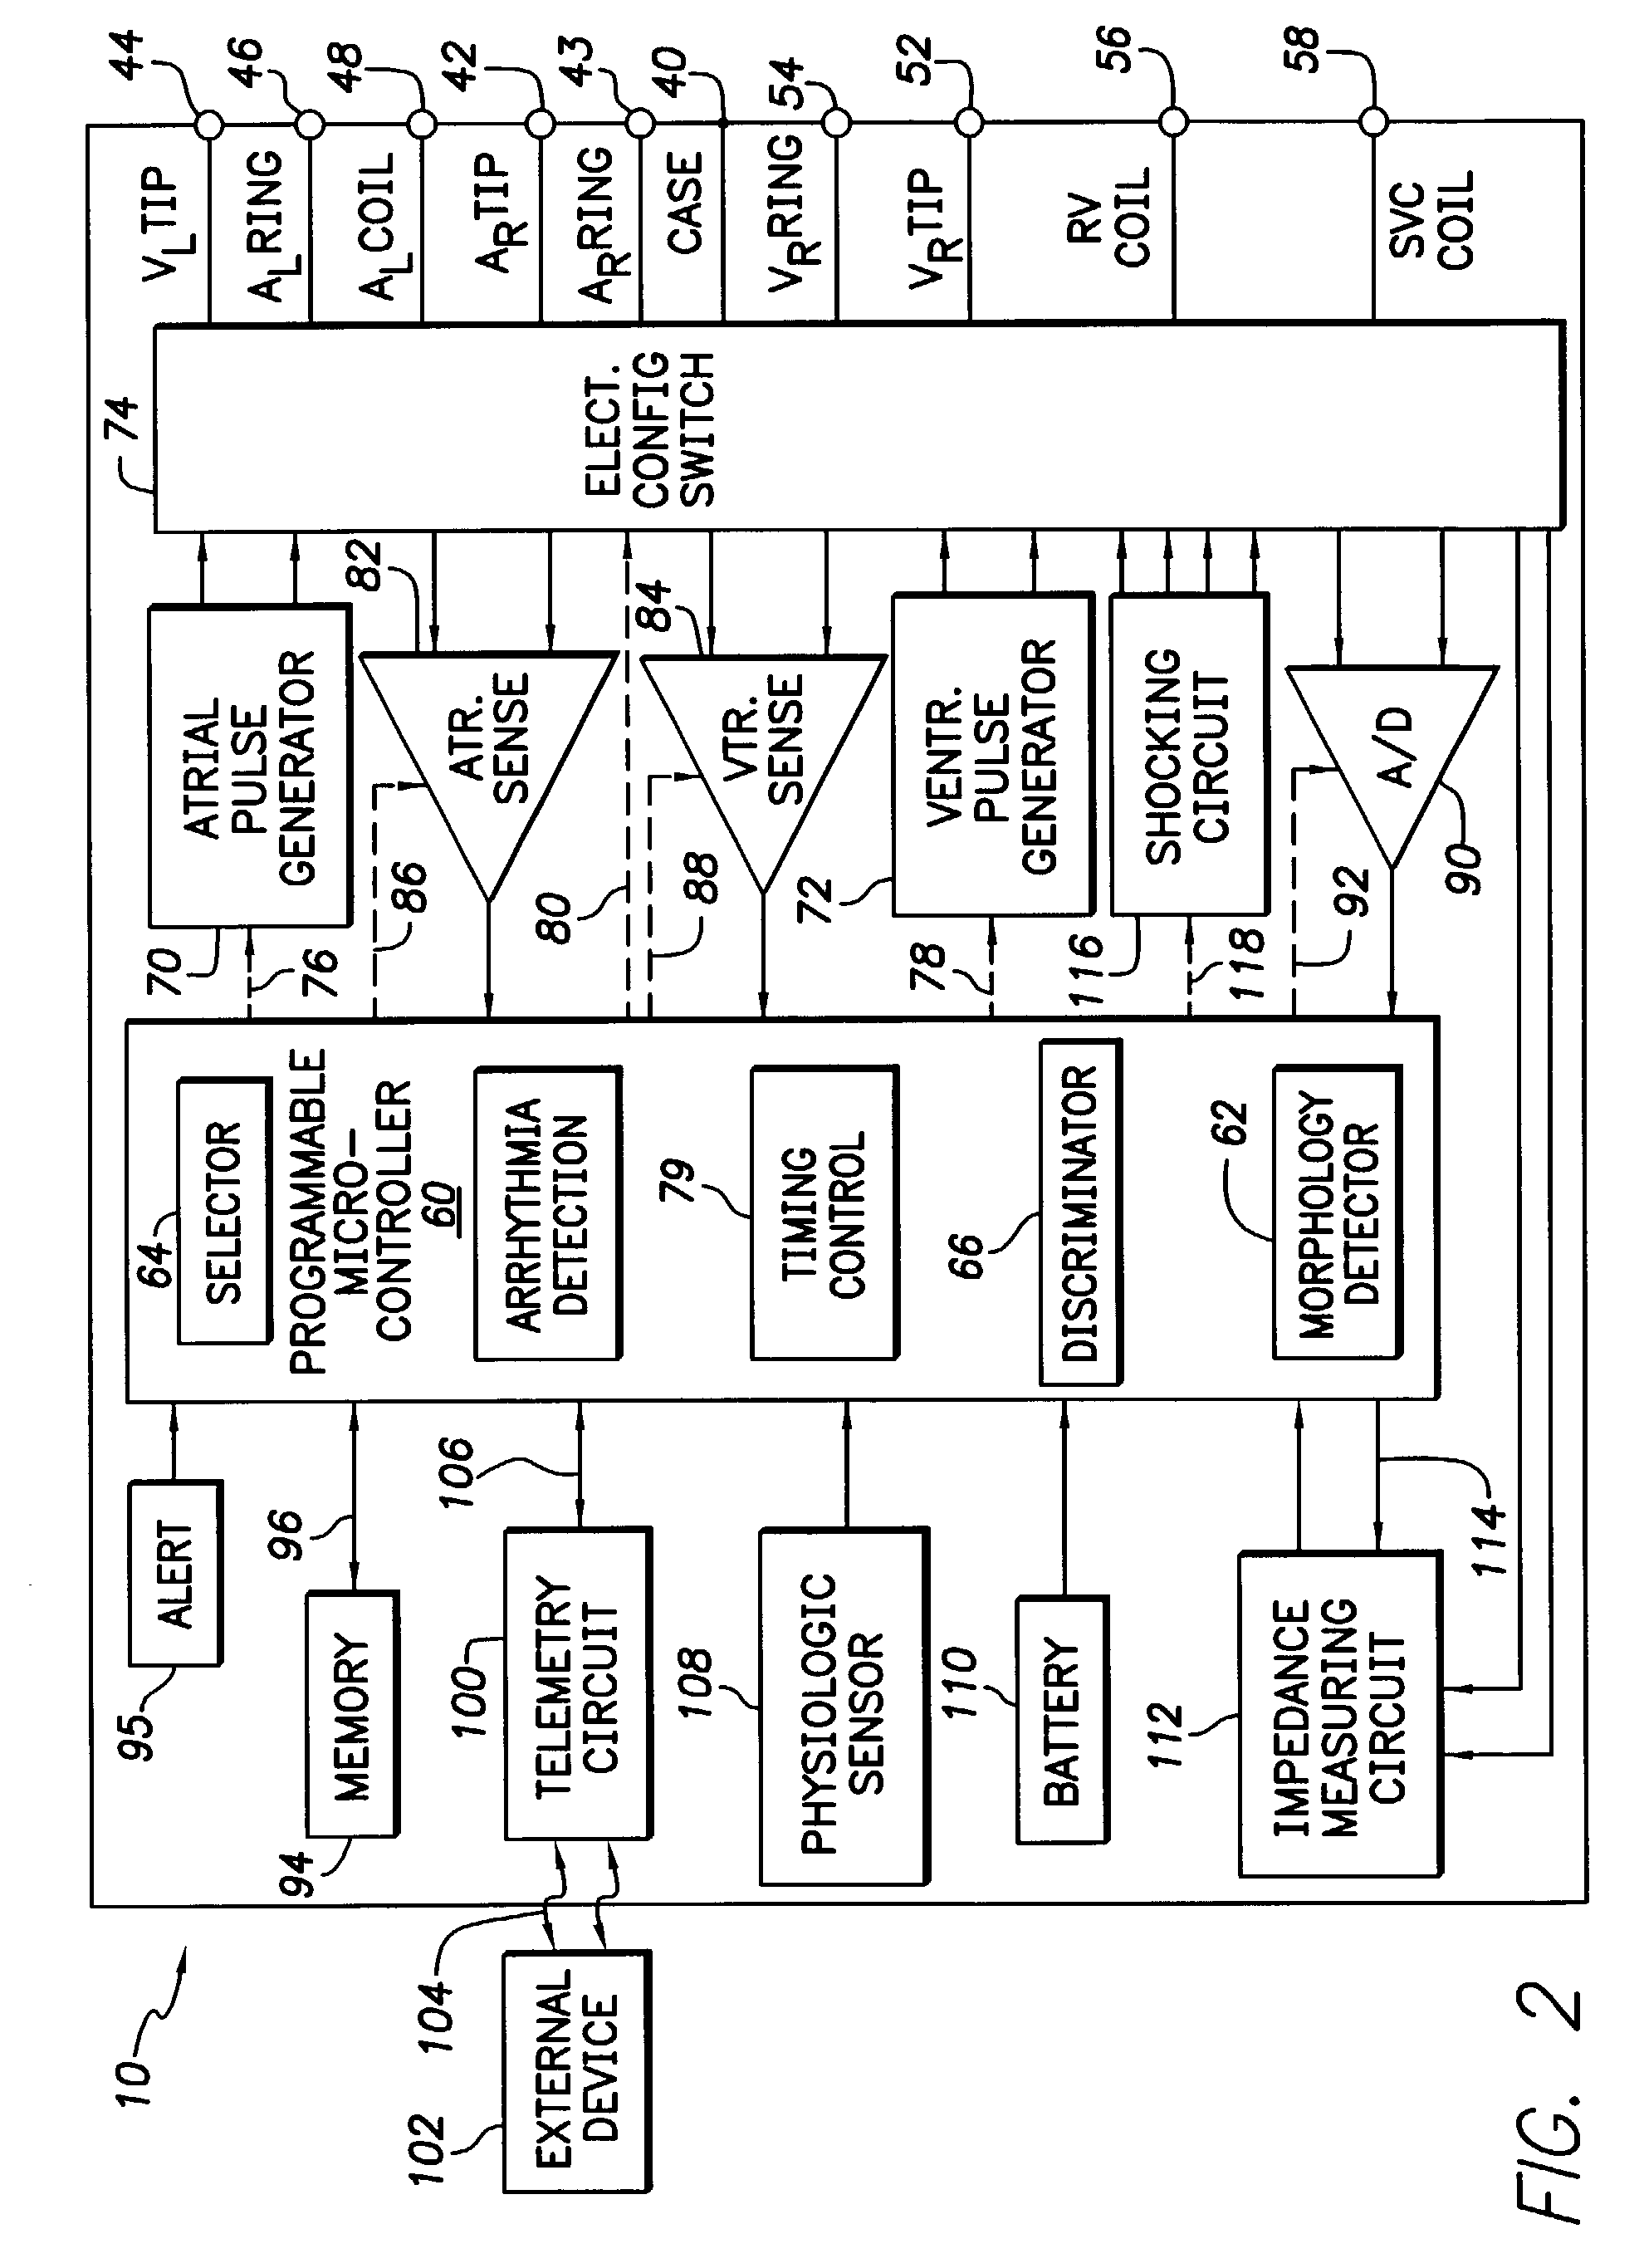 Implantable cardiac device having a system for detecting T wave alternan patterns and method